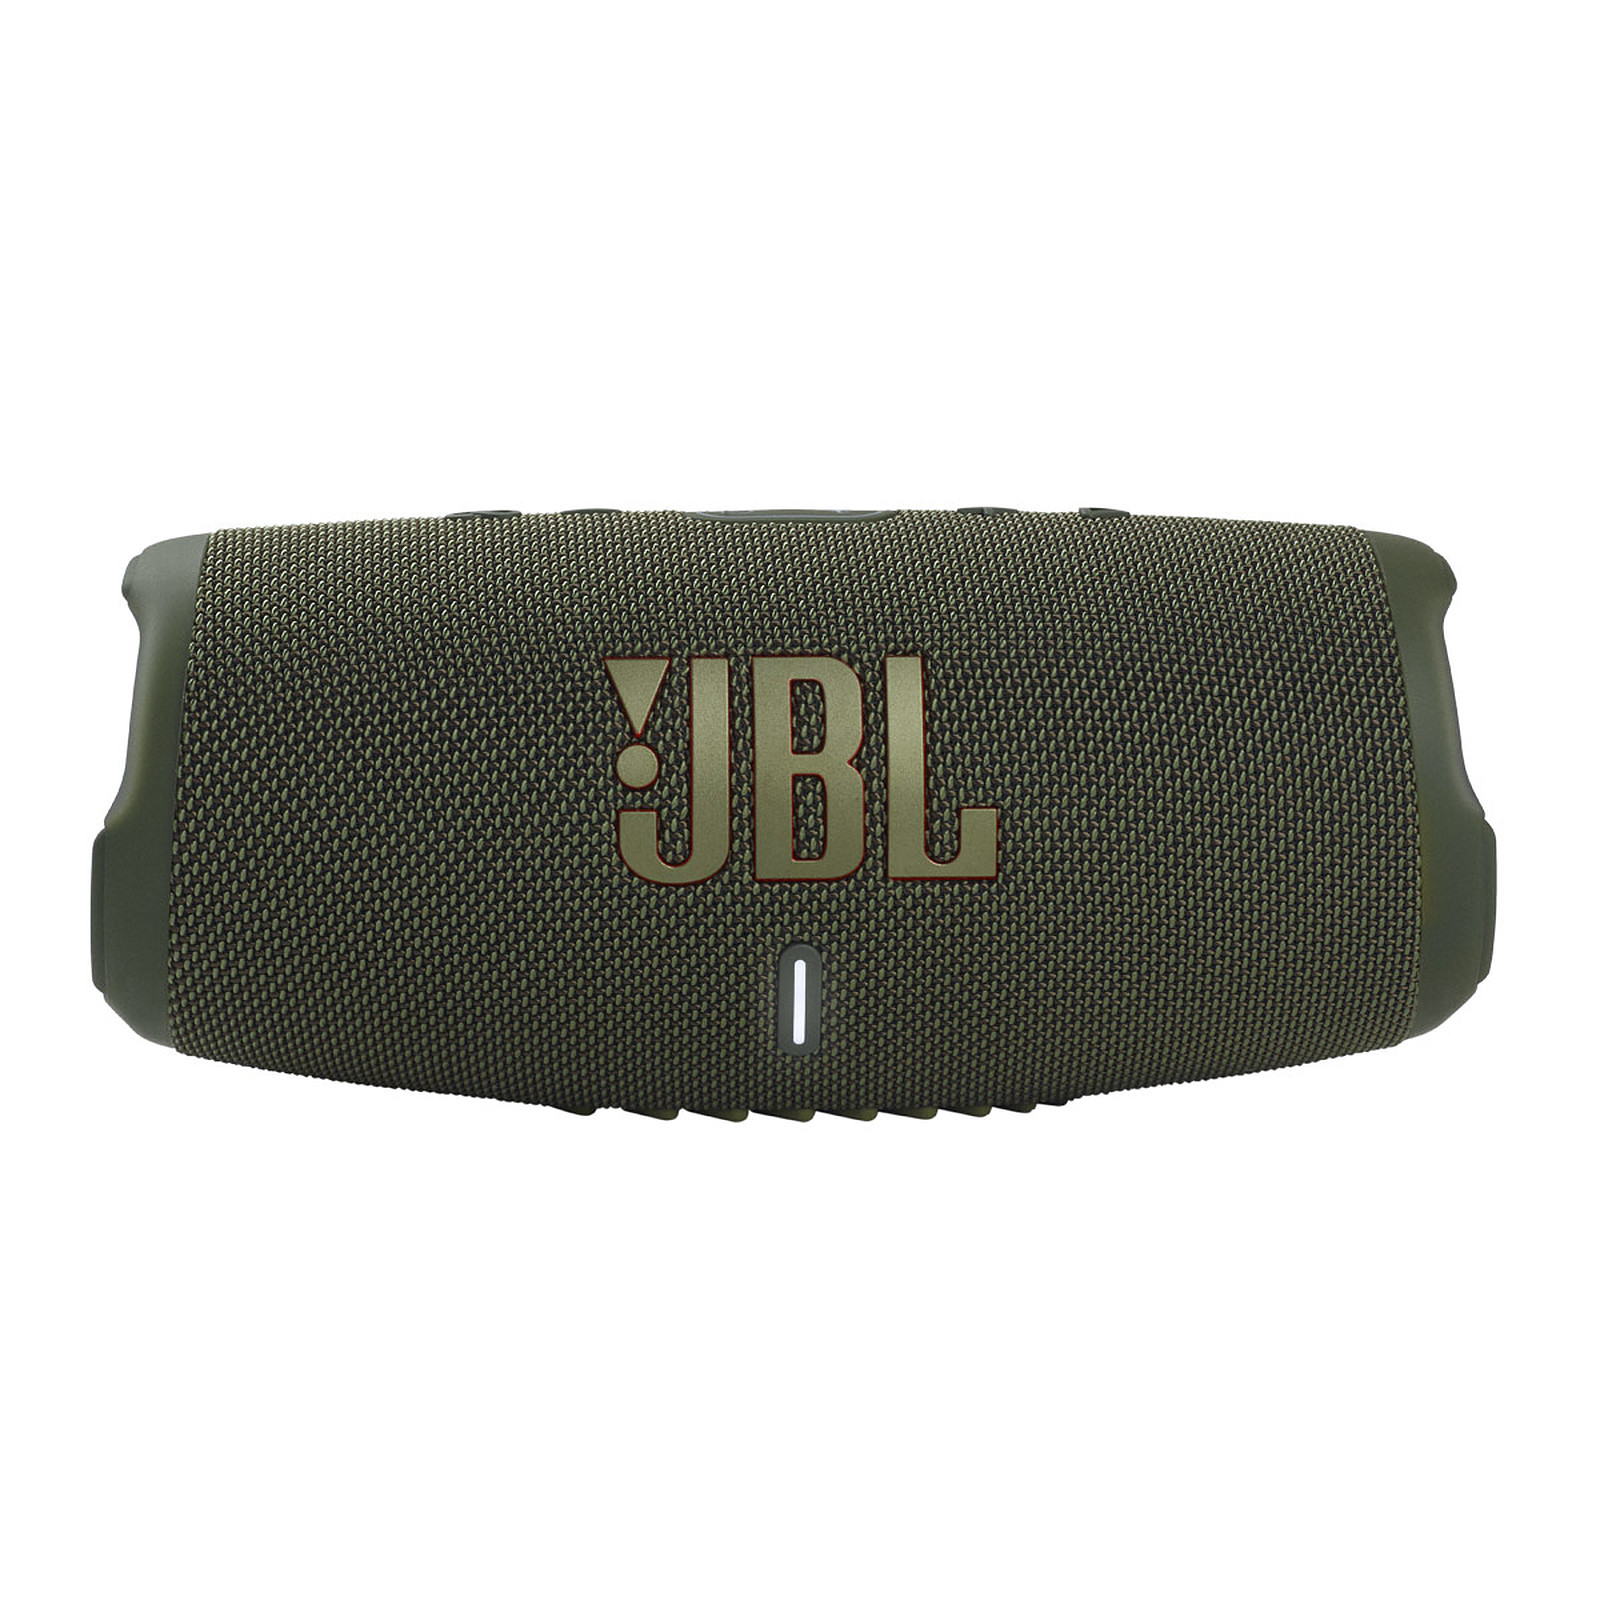 Parlante Jbl Charge 5 Green